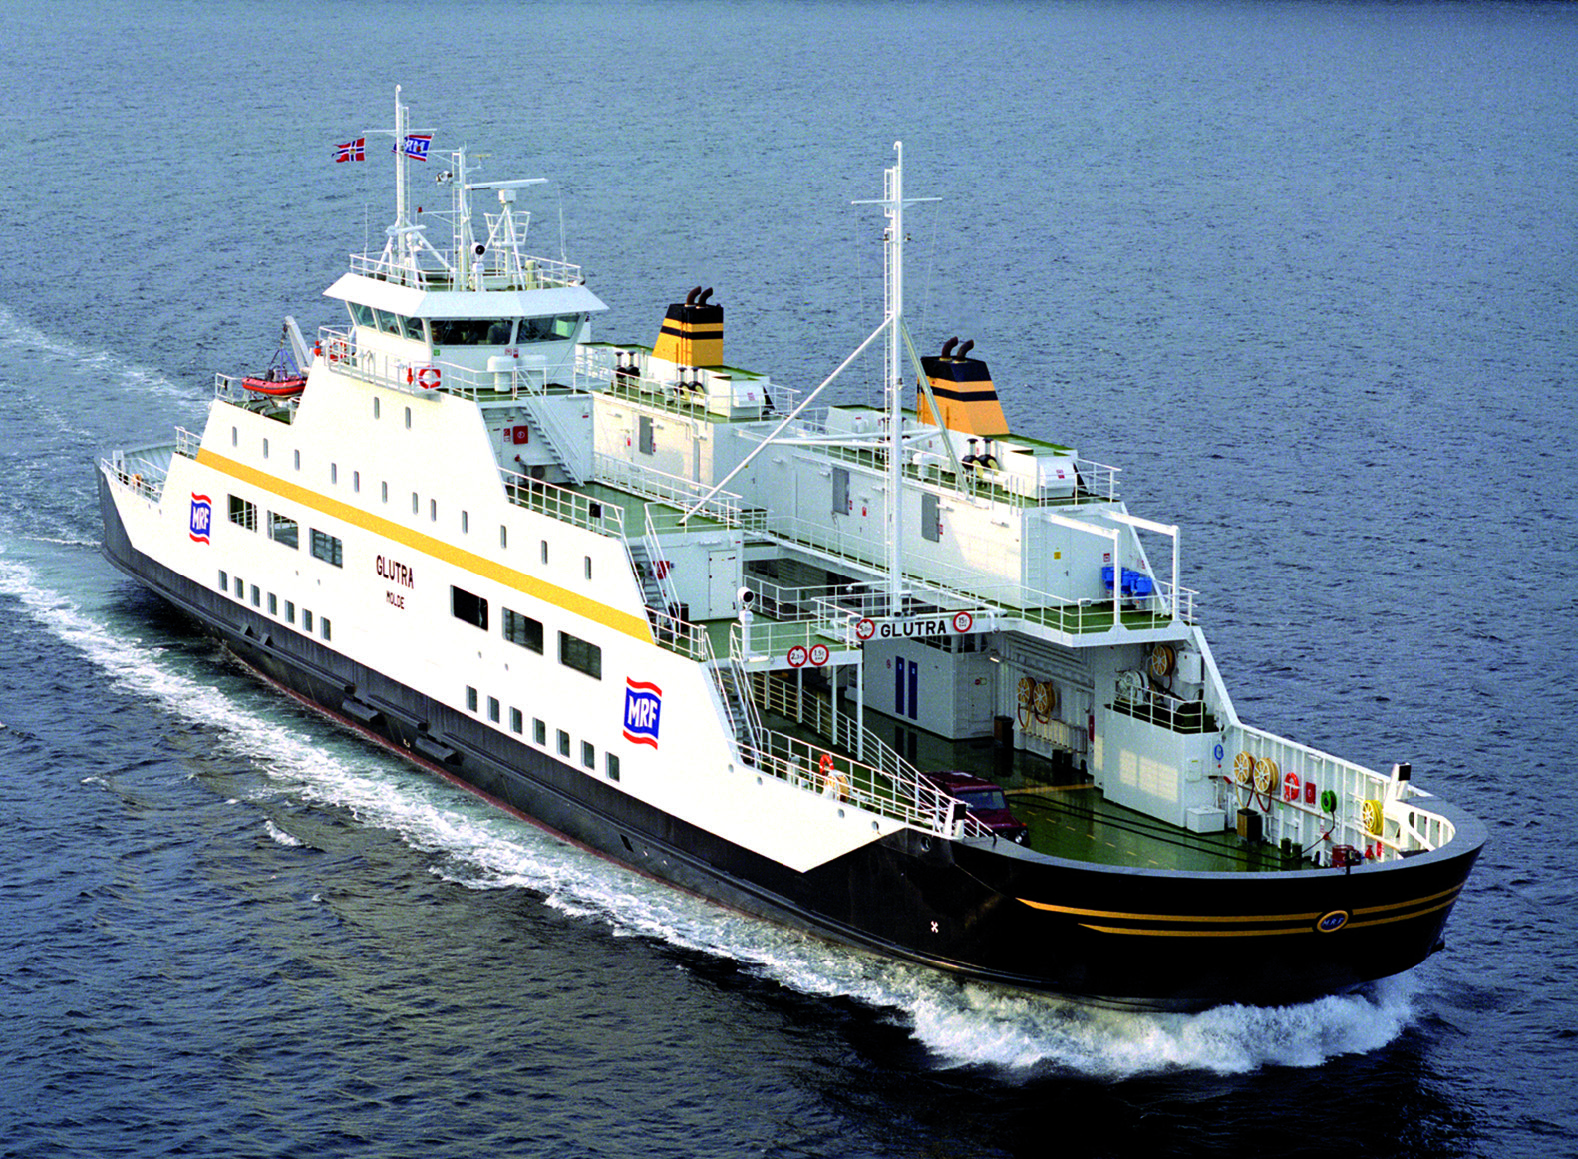 Natural gas-fuelled ferry GLUTRA